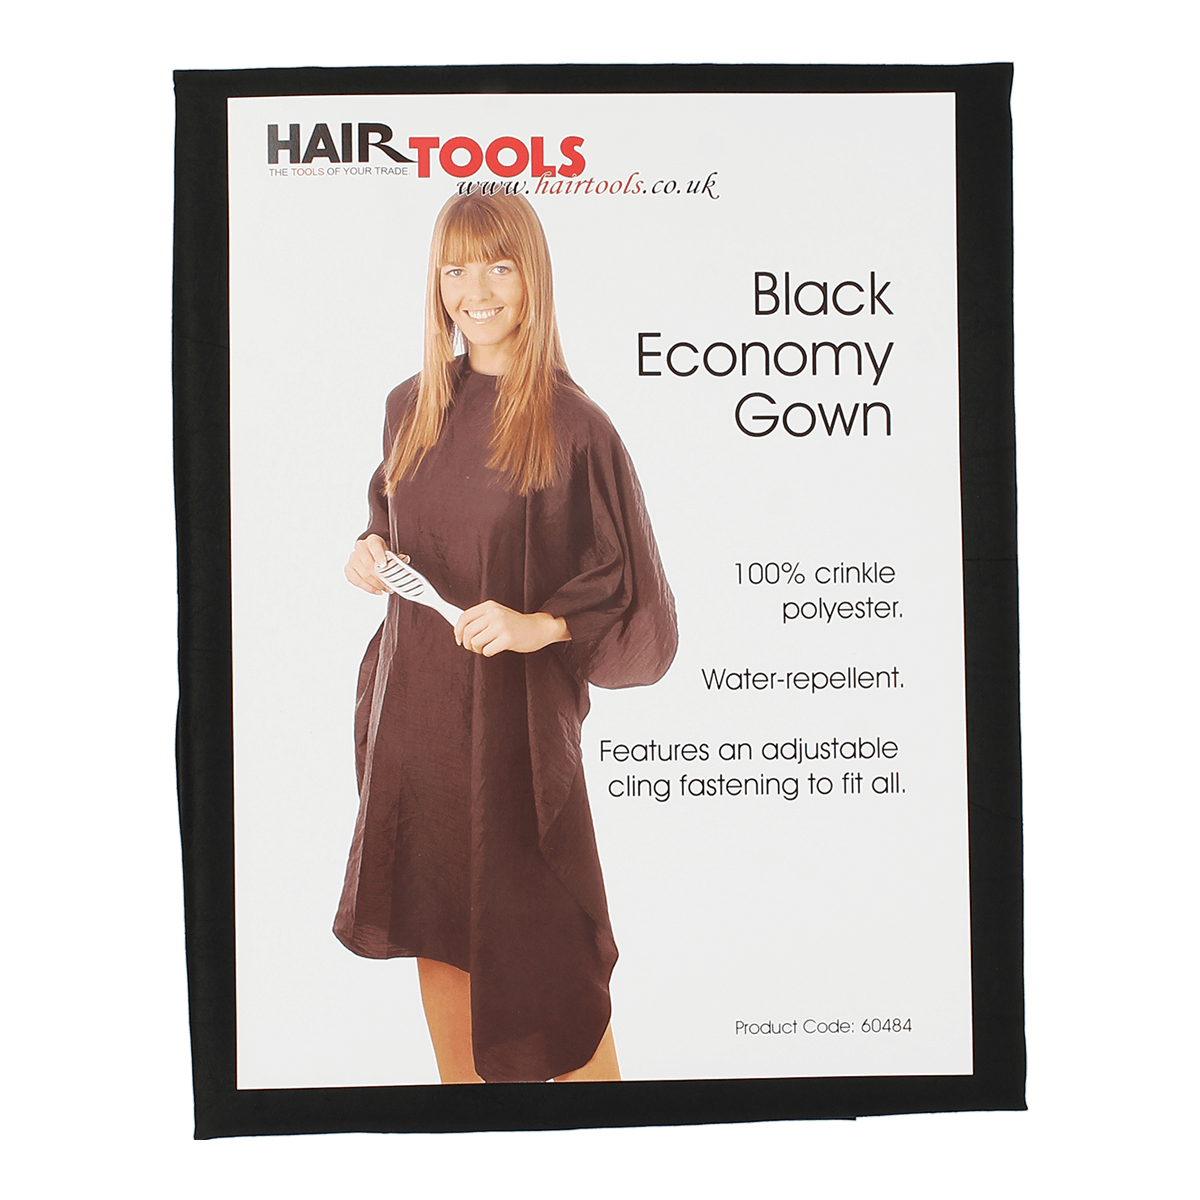 Black Economy Gown Hair Tools - Ultimate Hair and Beauty